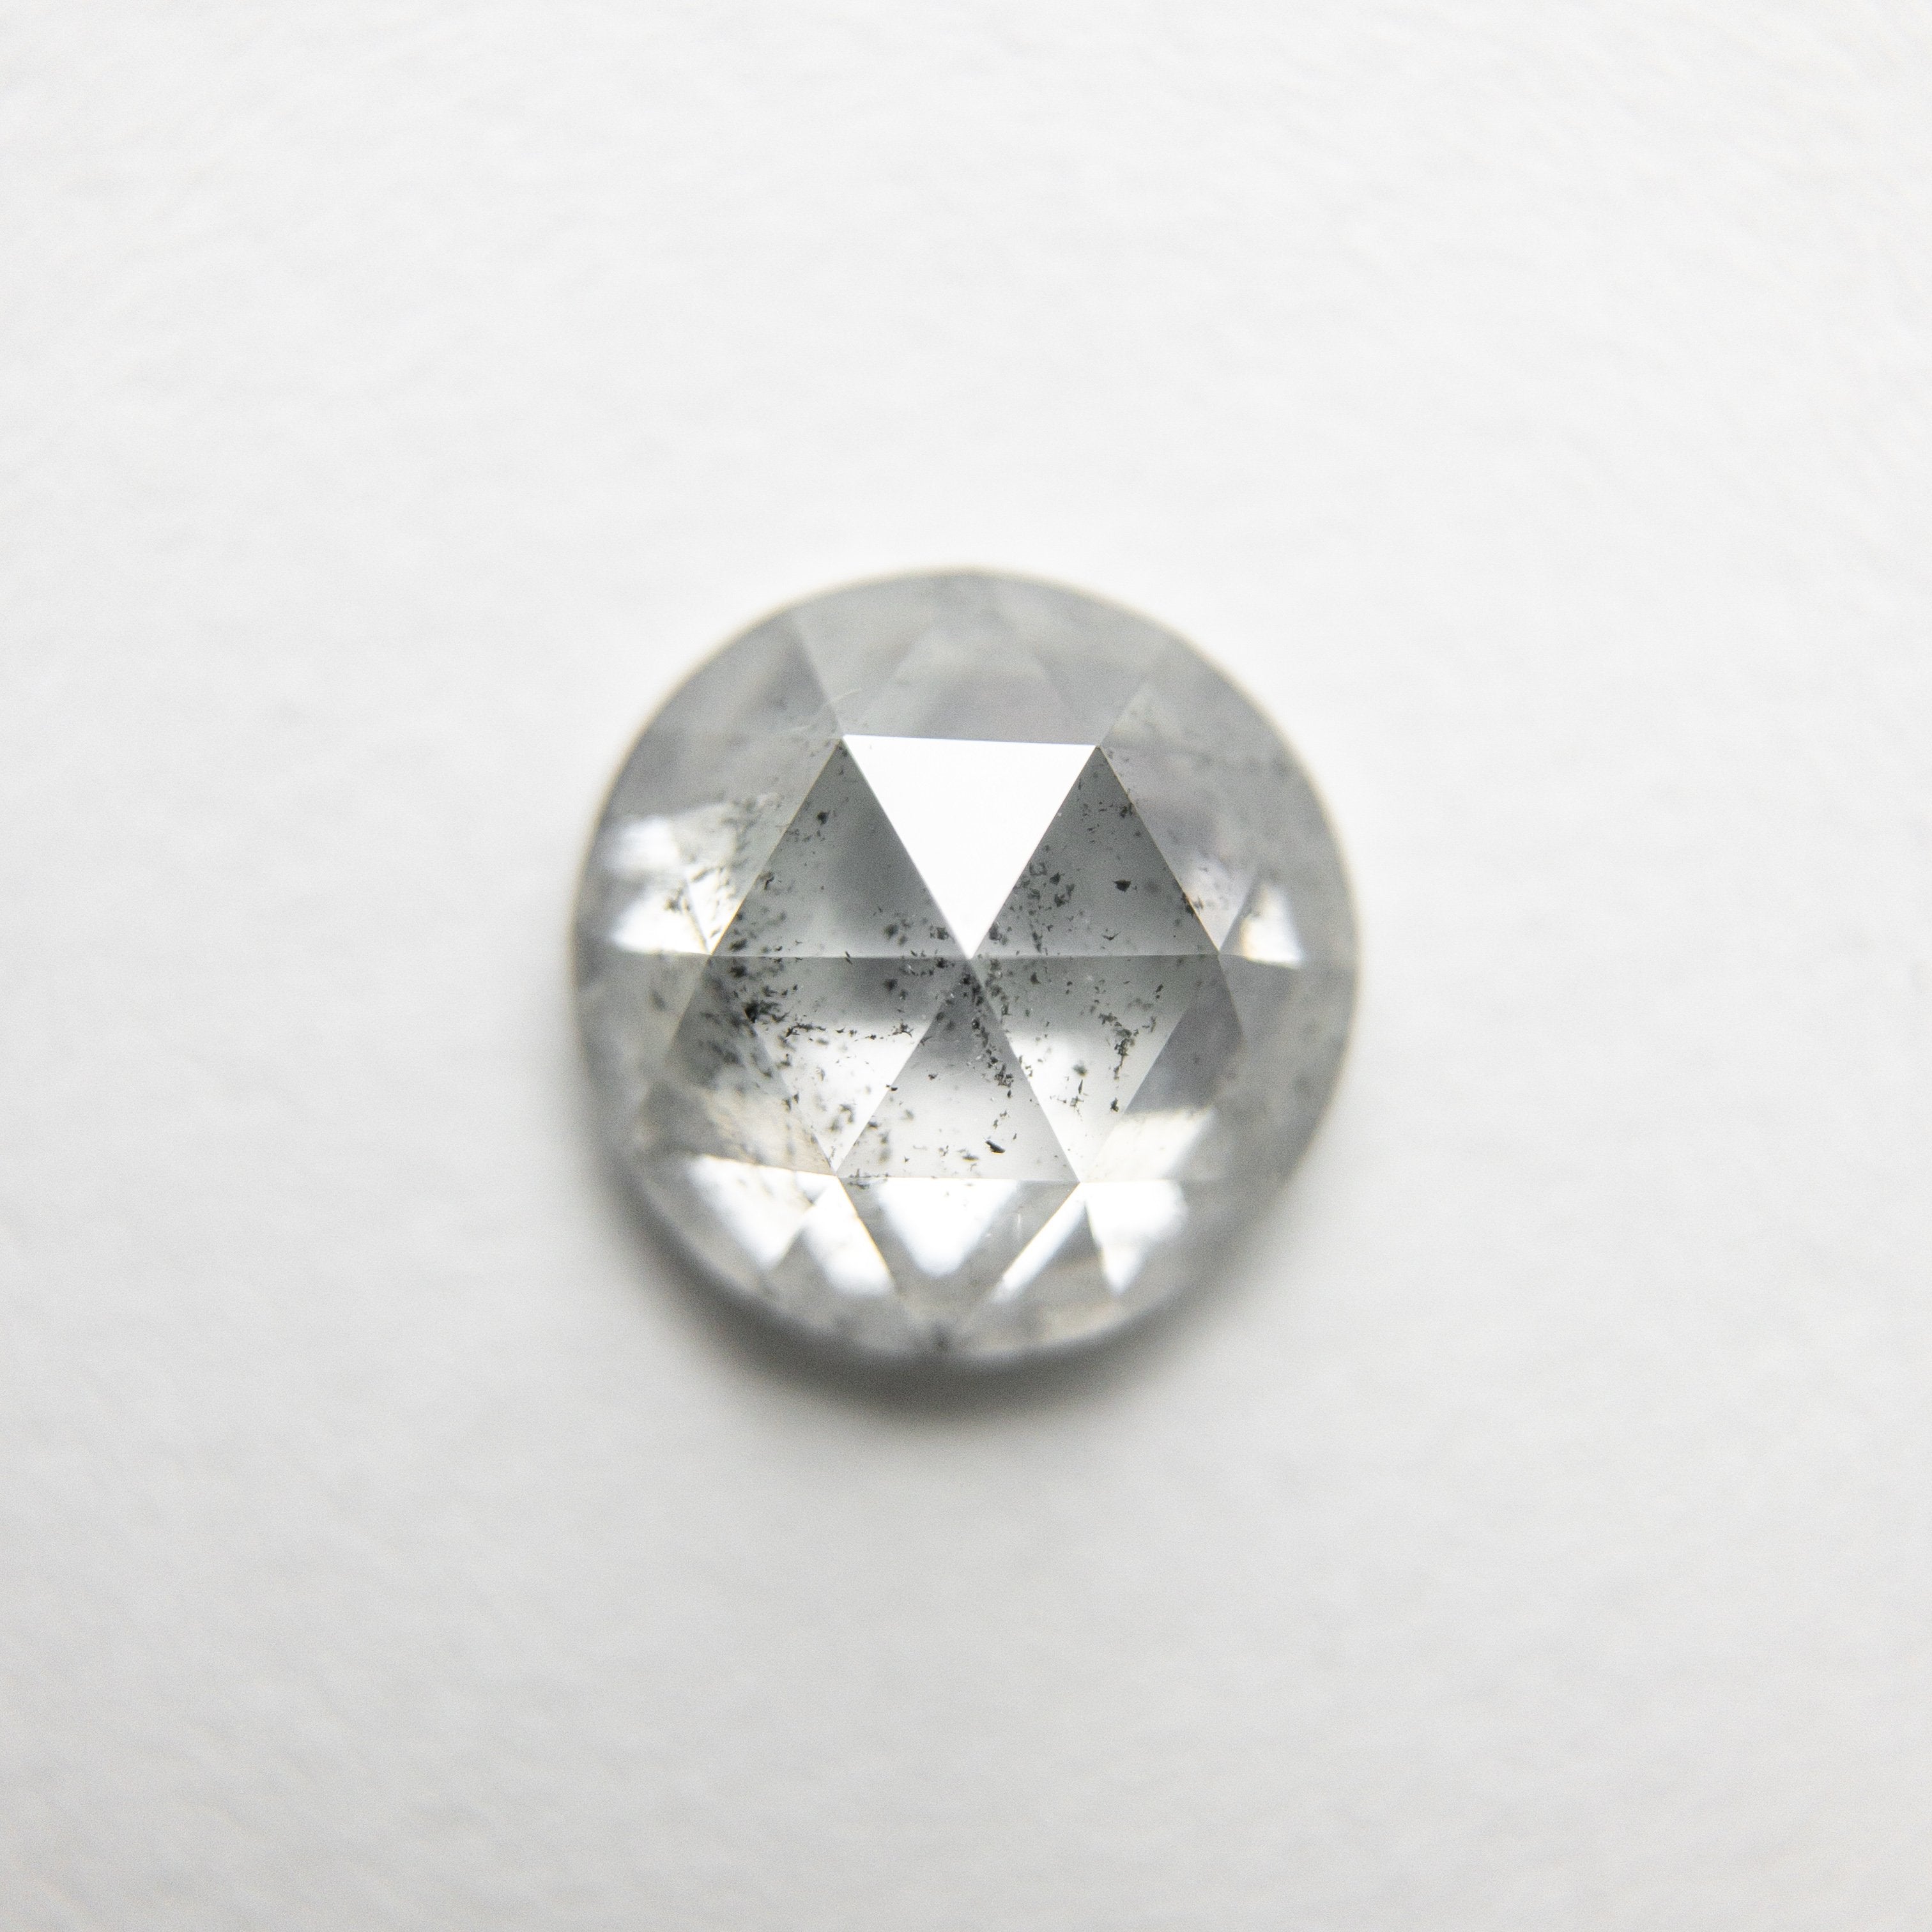 1.12ct 6.69x6.62x3.07mm Round Rosecut 18194-38 HOLD 06.11.20 D763